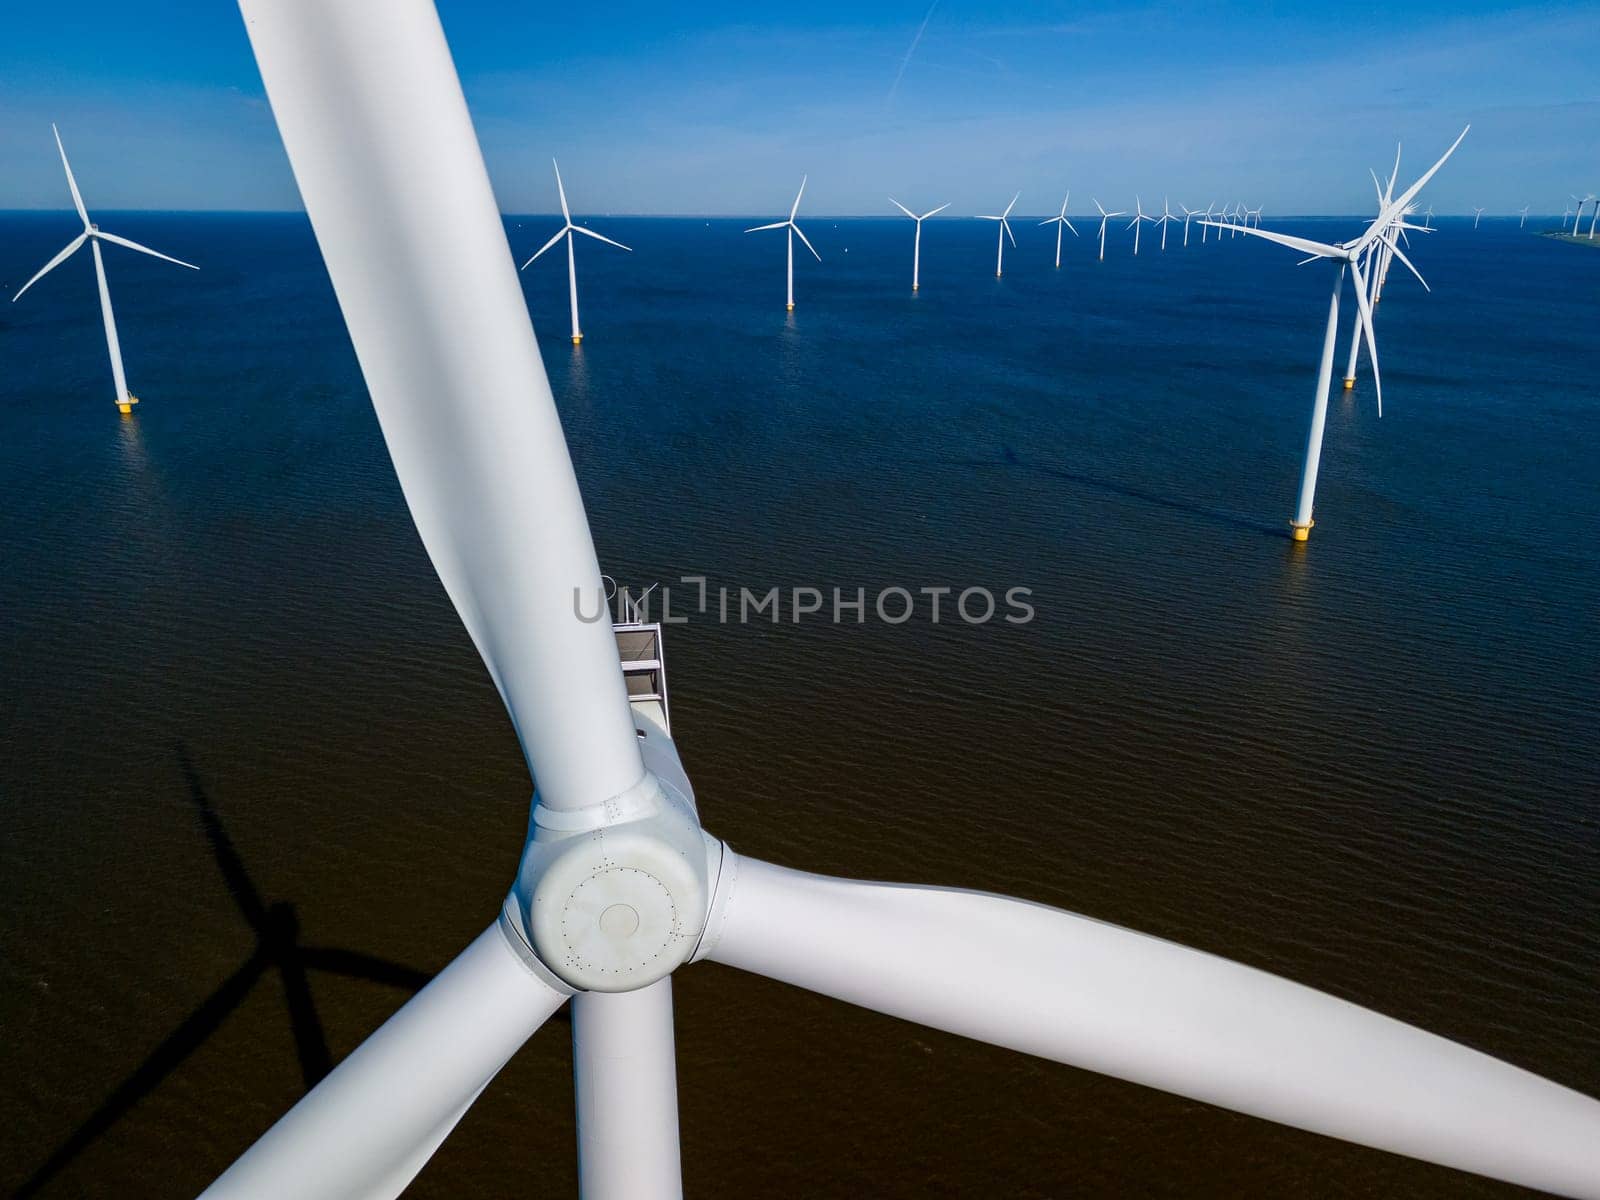 A group of majestic wind turbines stand tall in the ocean,wind to generate clean energy in Flevoland by fokkebok